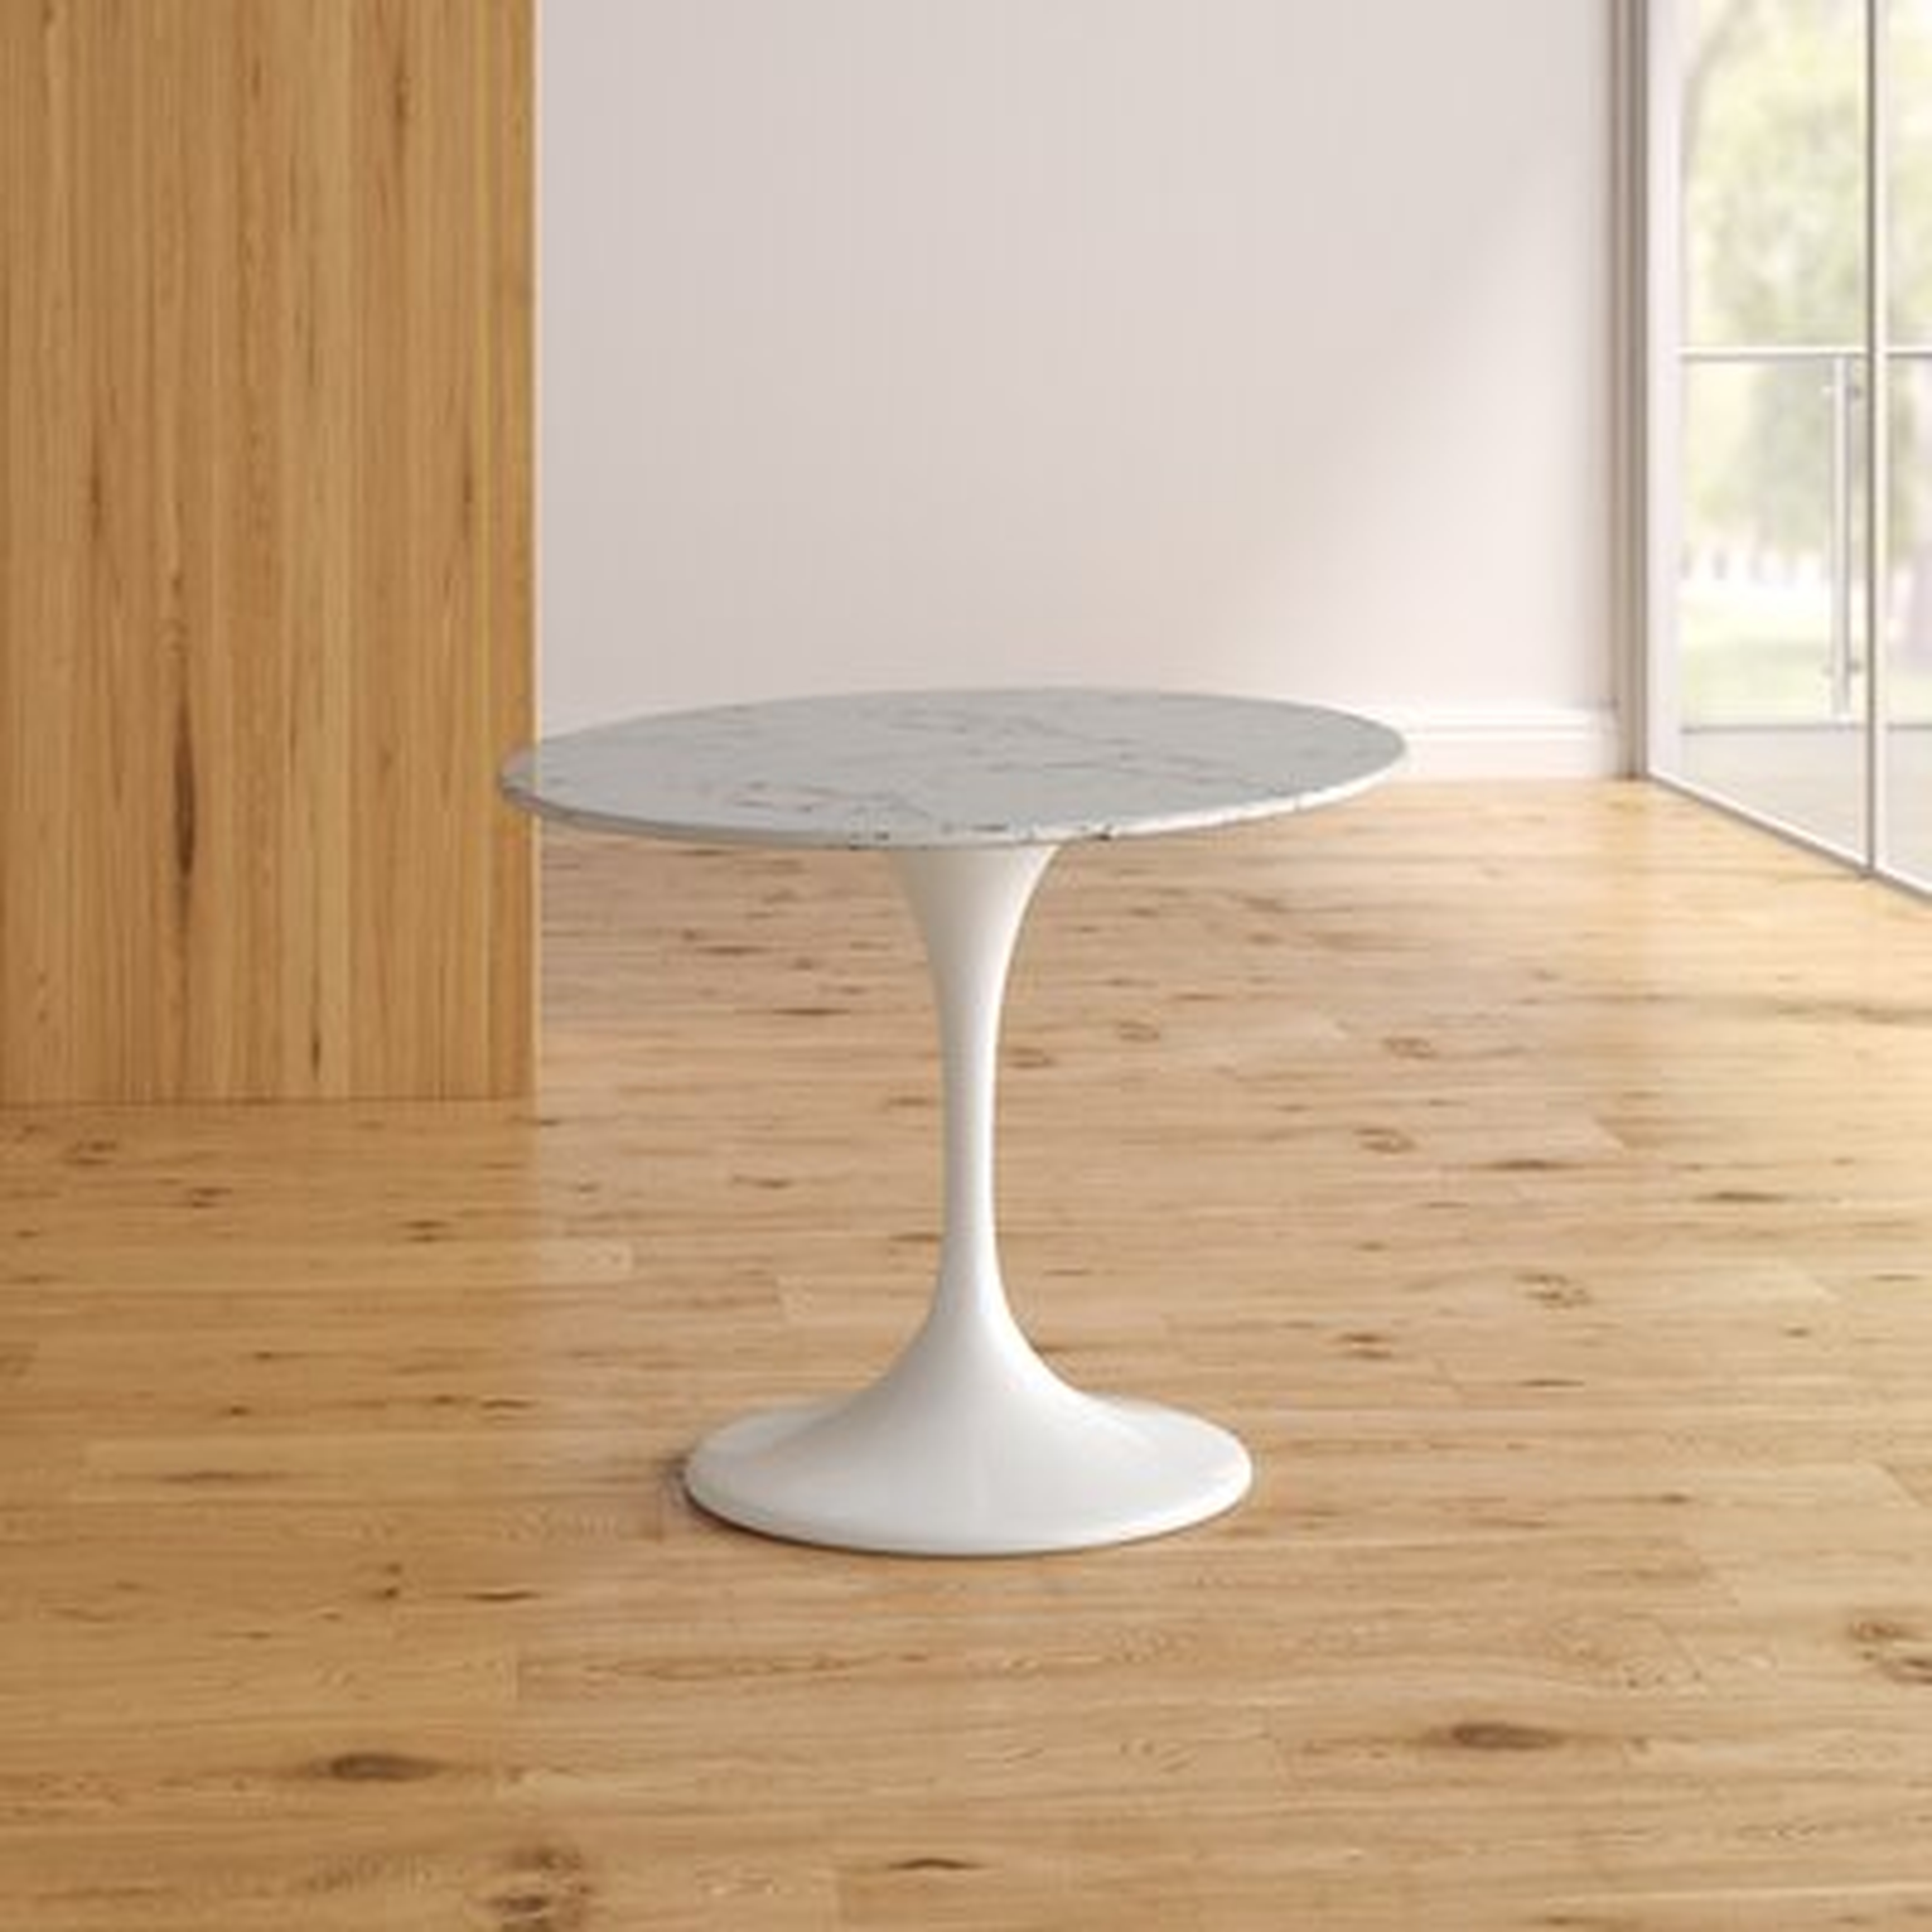 Kylee Artificial Marble Oval-Shaped Dining Table - Wayfair